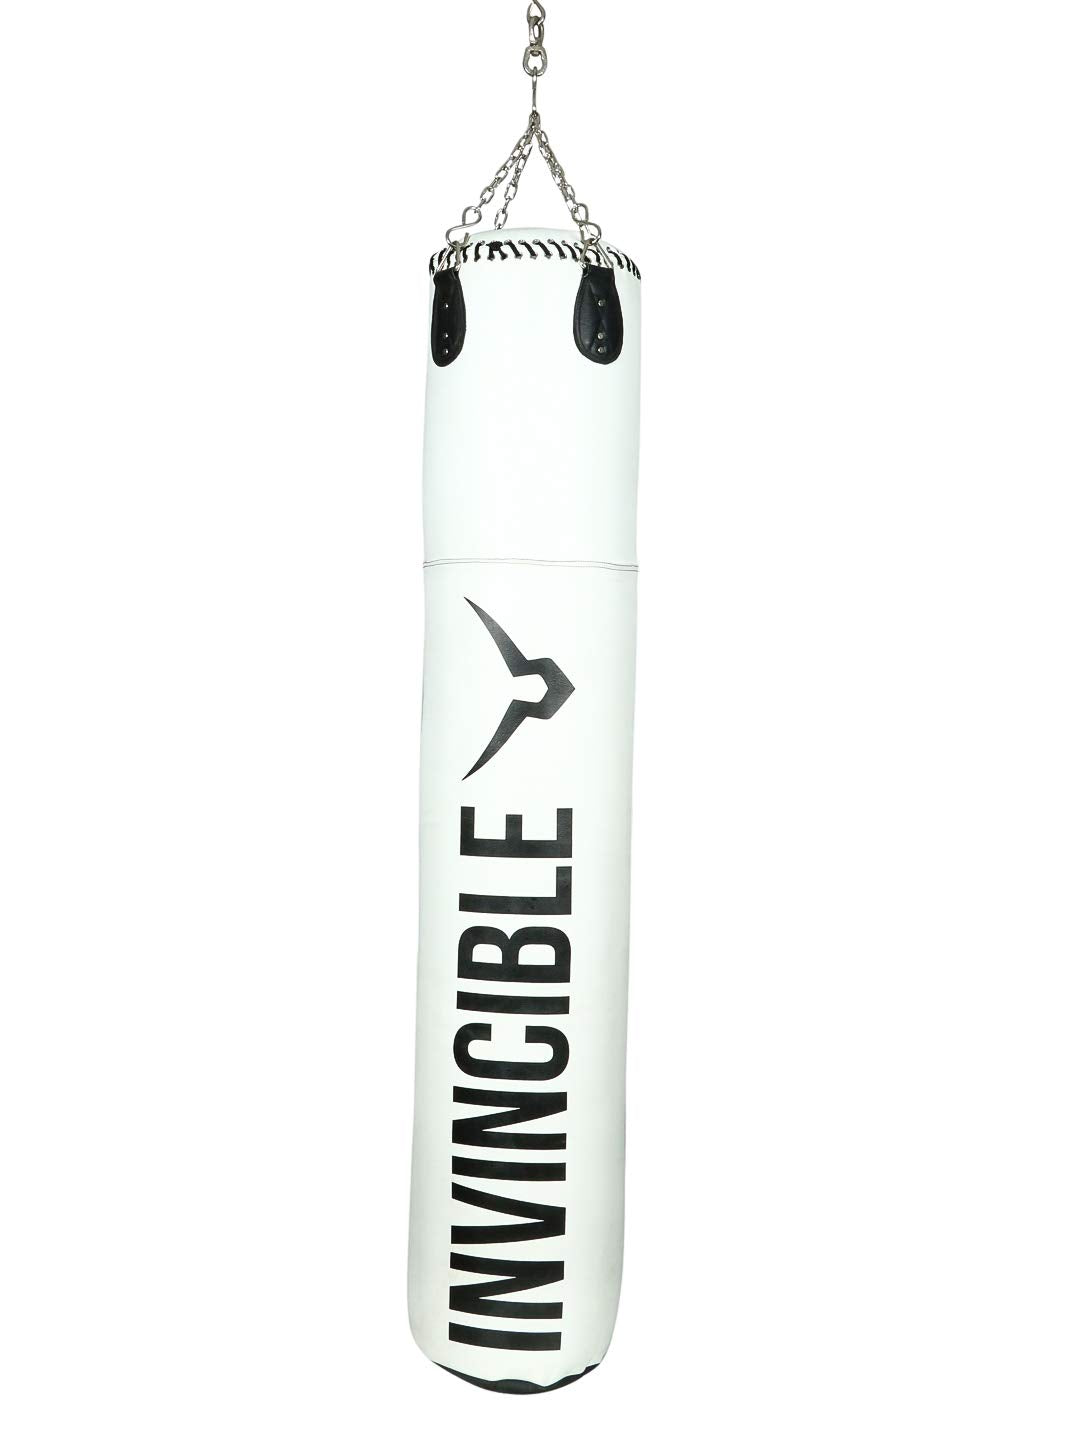 Invincible Pro Gear Leather Filled Boxing Bag